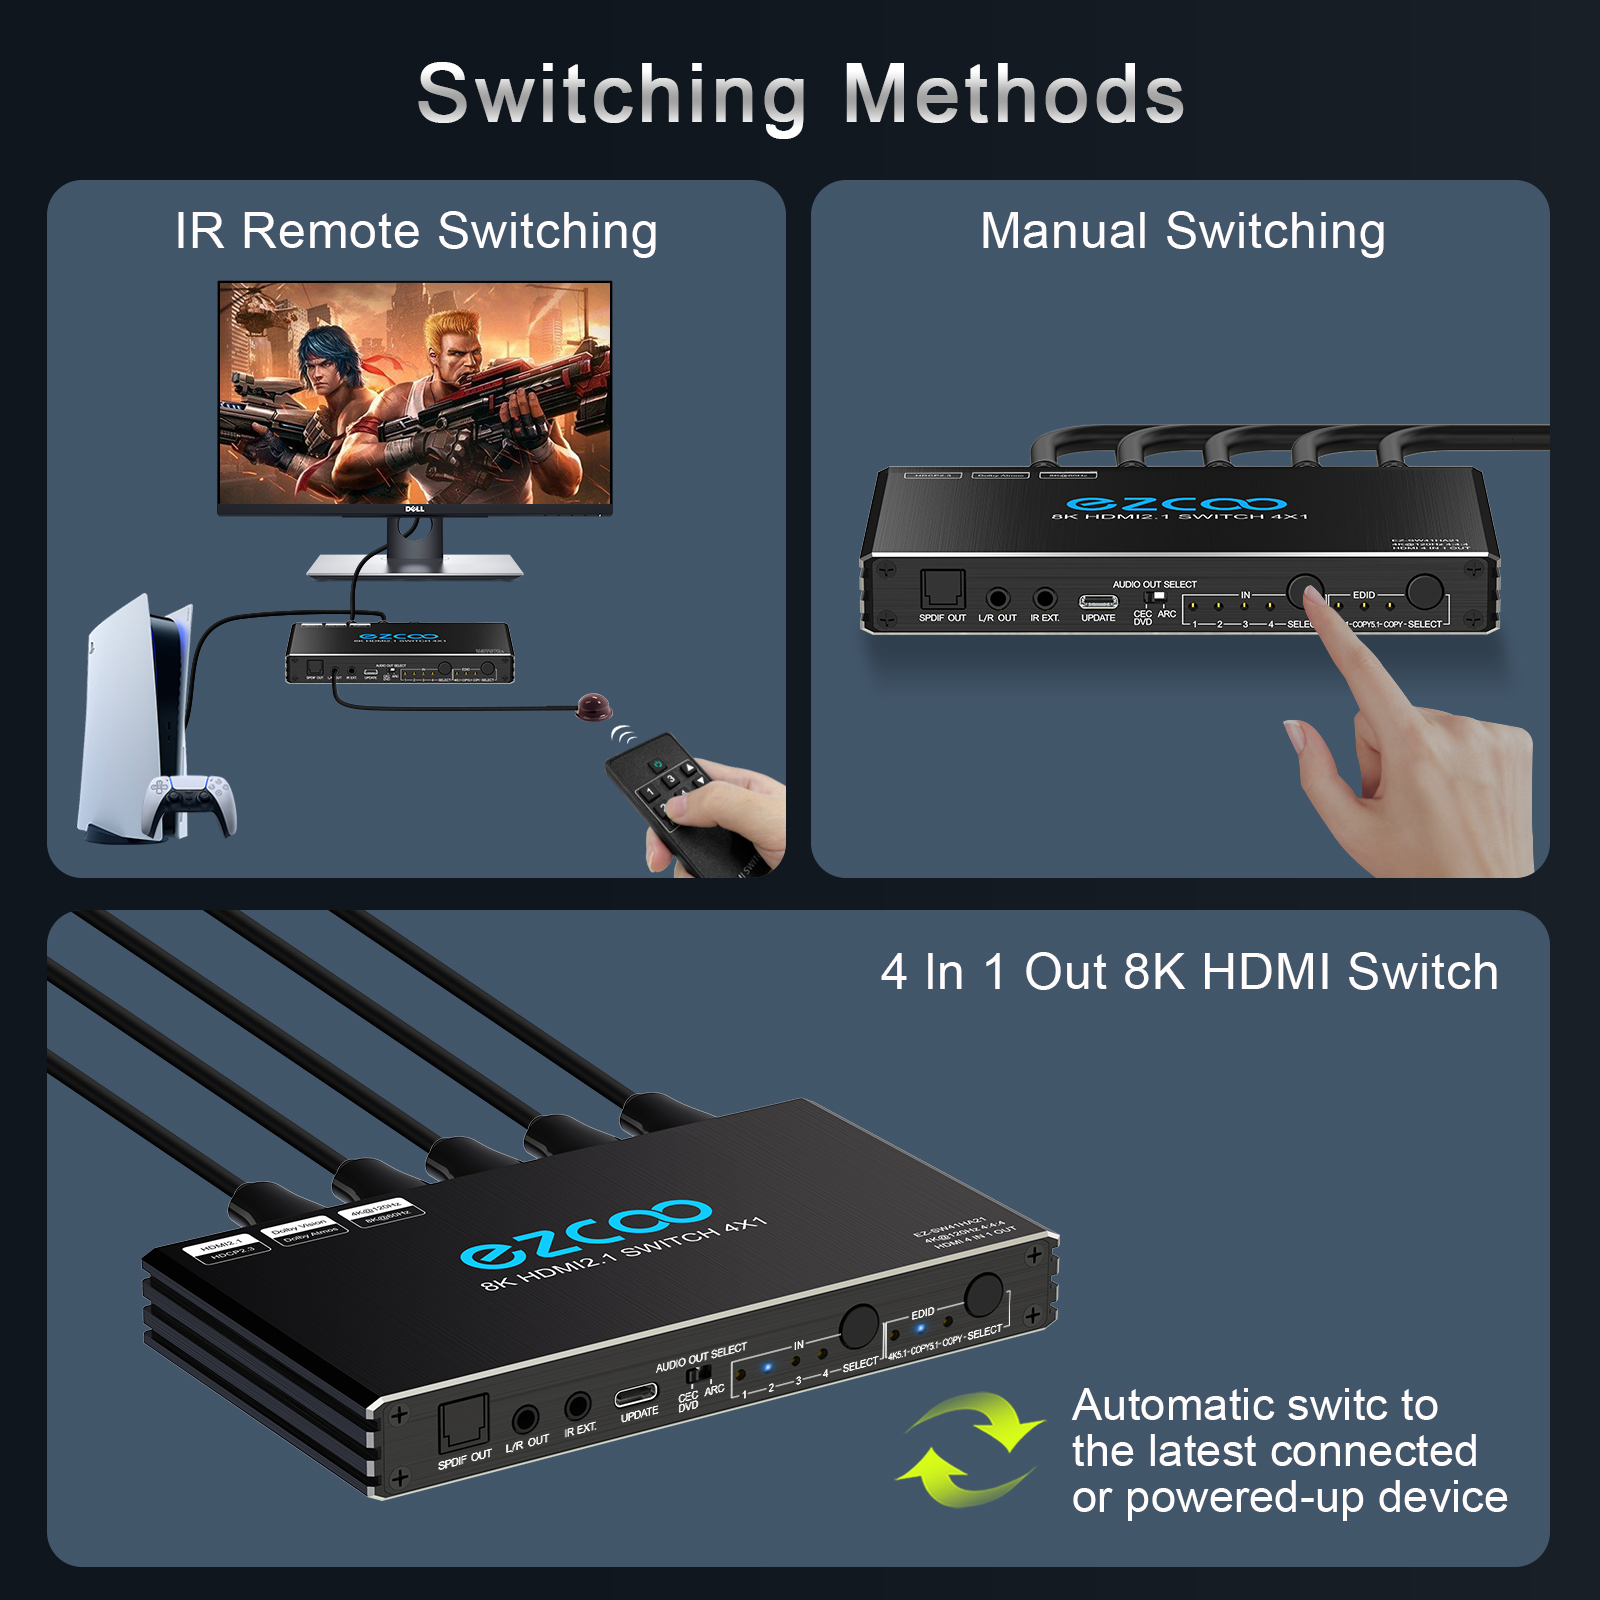 8K HDMI Switch 4 in 1 out with audio breakout, HDMI2.1 switcher